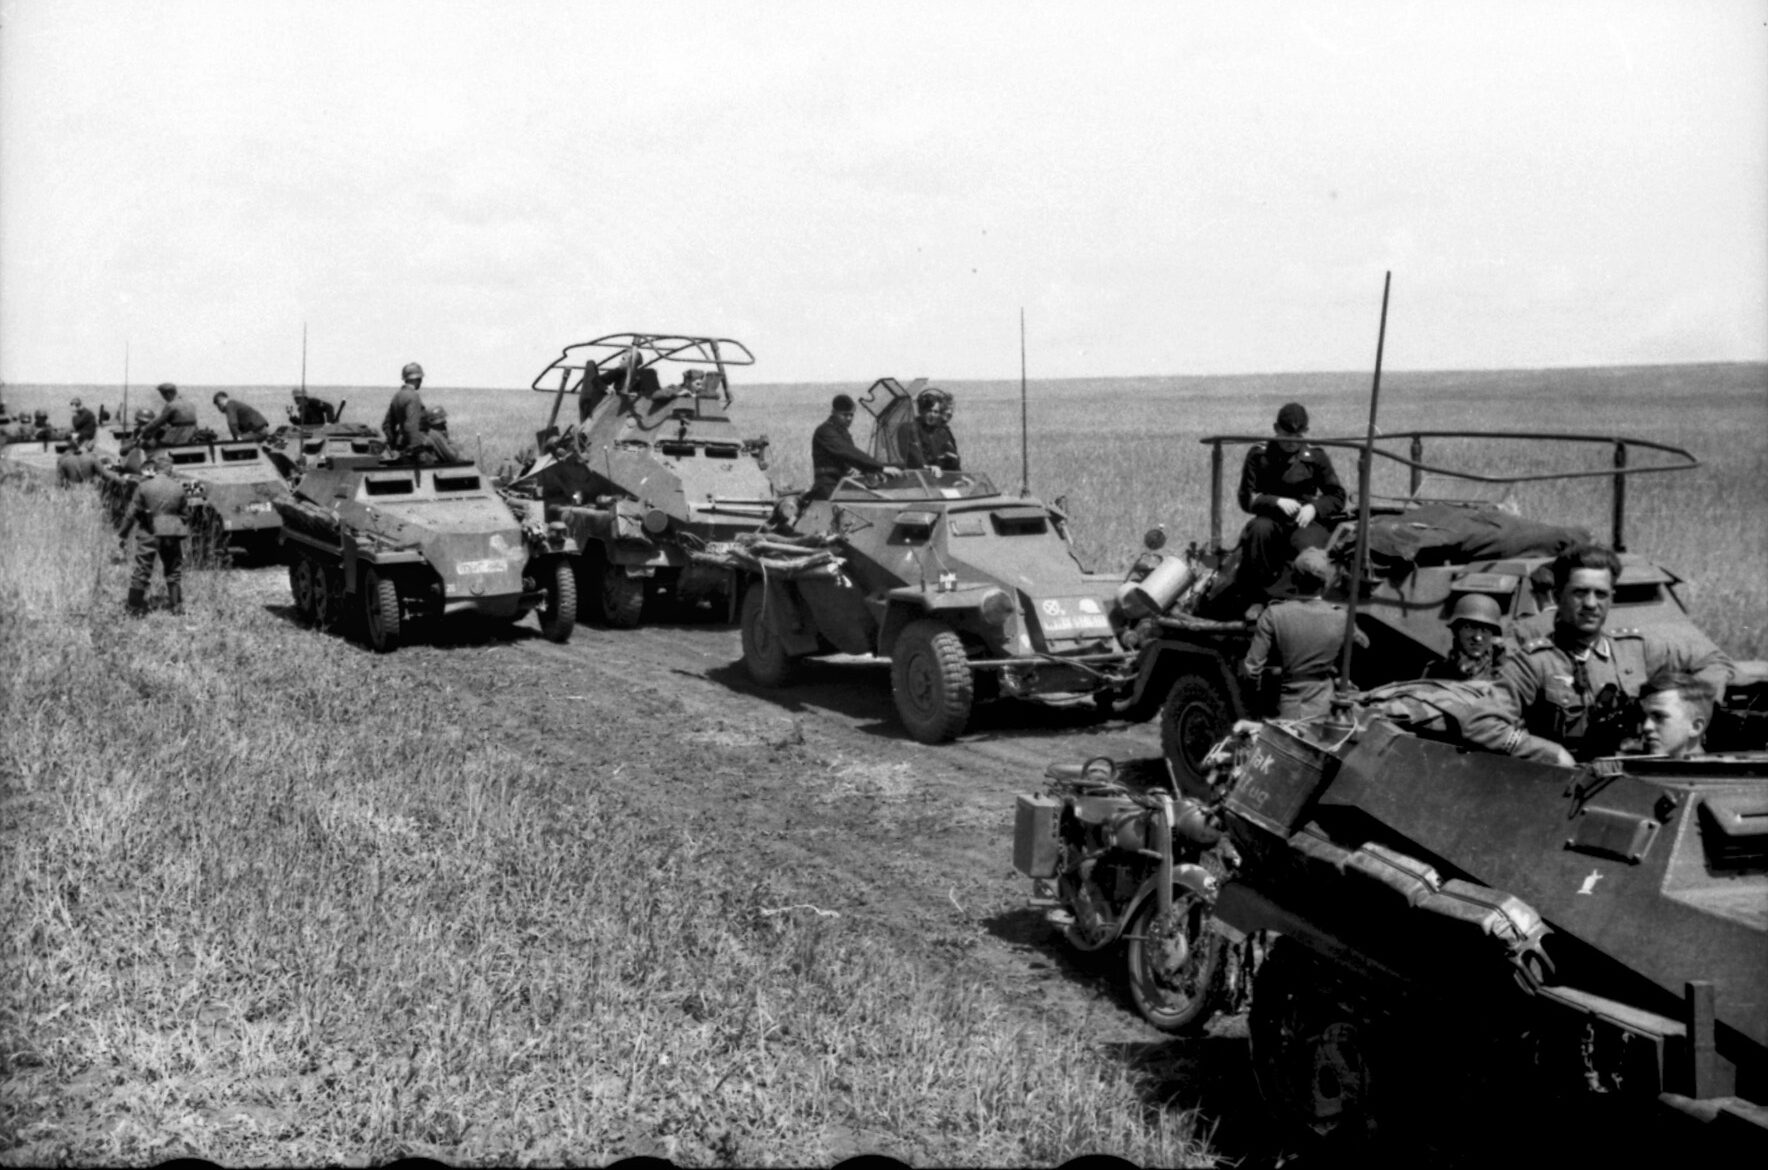 Reconnaissance troops of Panzergrenadier Division Grossdeutschland cross the Ukrainian steppe northwest of Kharkov. Pictured with half-tracks are an SdKfz.222 light armored vehicle and the SdKfz.263 heavy armored command vehicle.